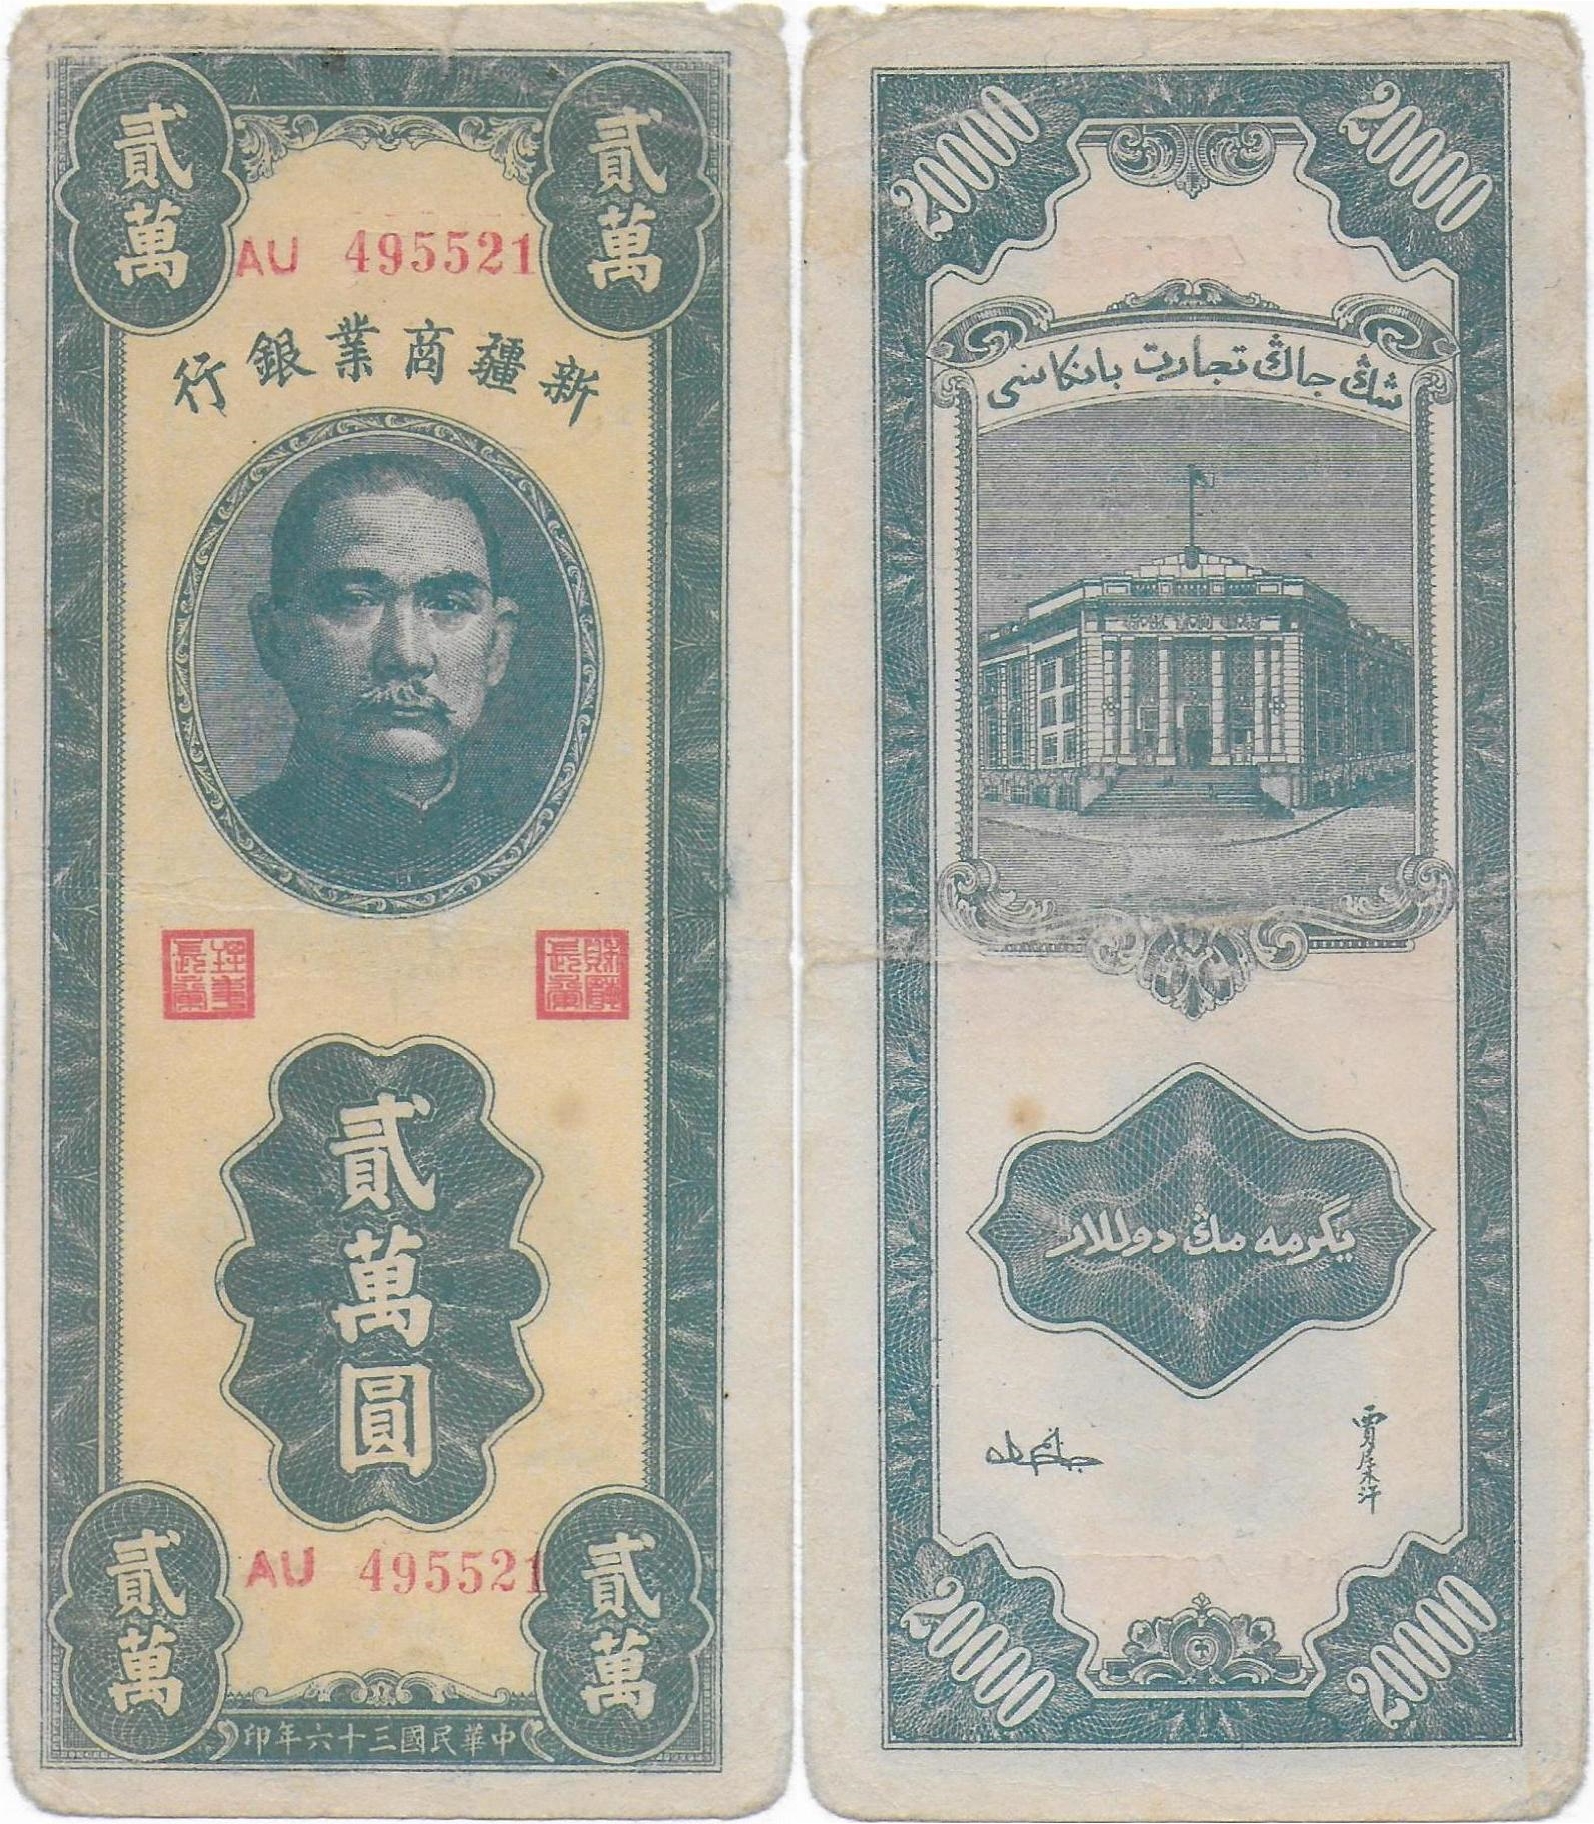 China Sinkiang Commercial and Industrial Bank 20000 Yuan YR 36 (1947) PS-1774 front-side.jpg